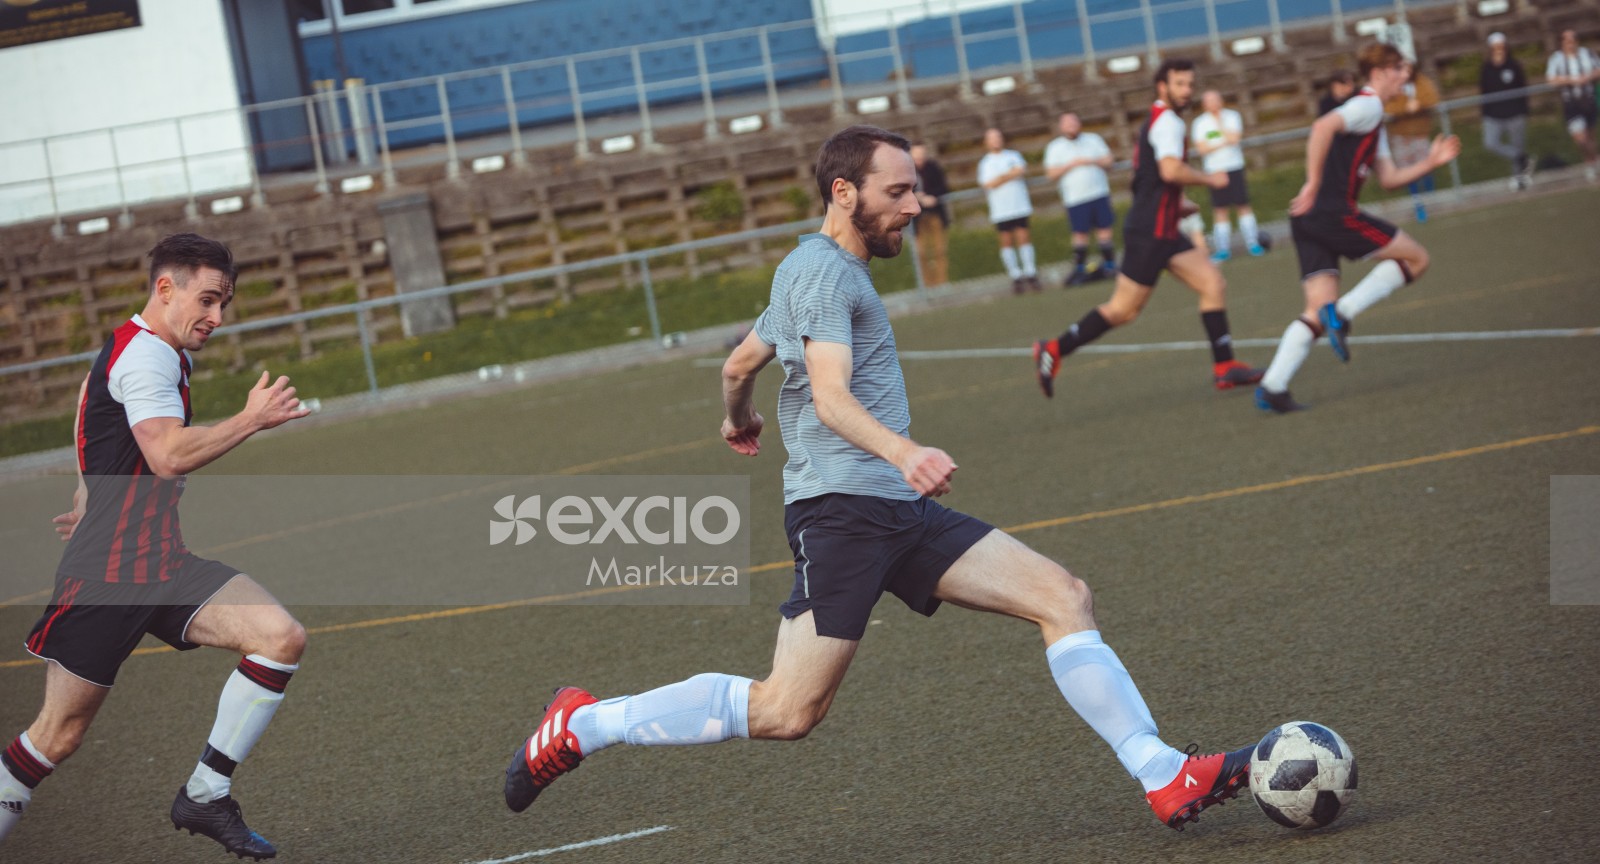 Player in a grey lined shirt running with the football - Sports Zone sunday league